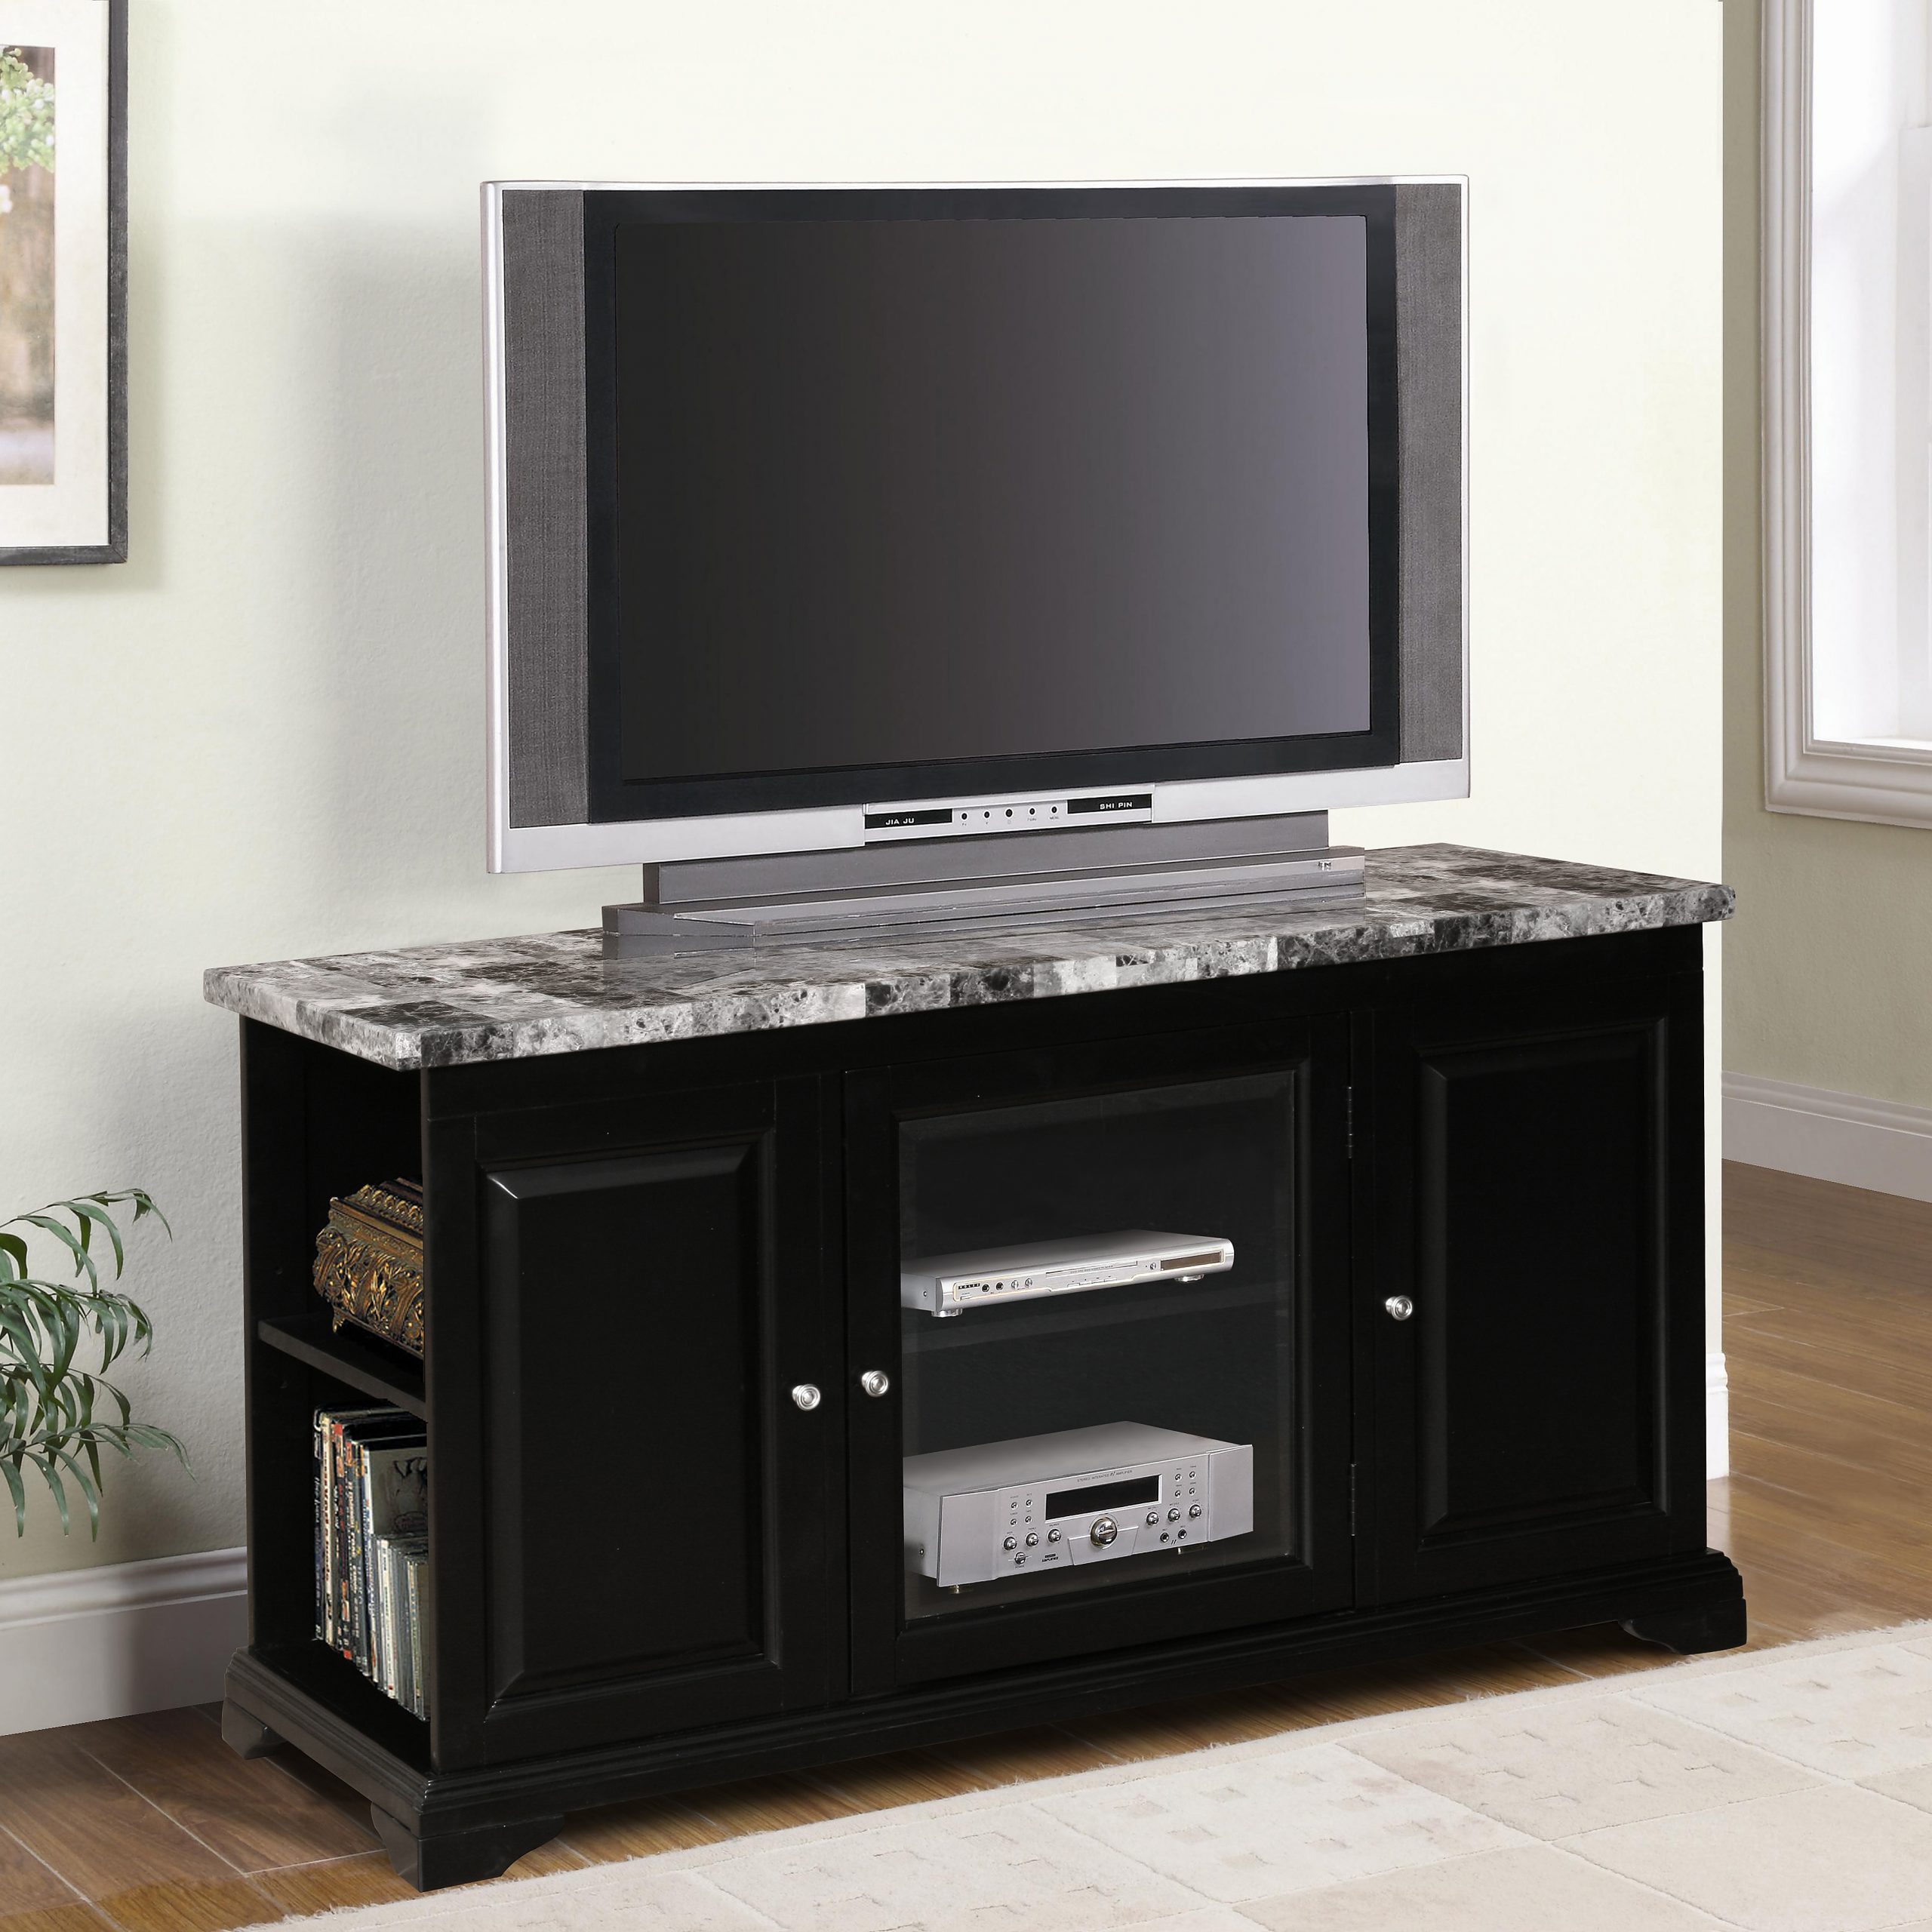 TV STAND 140